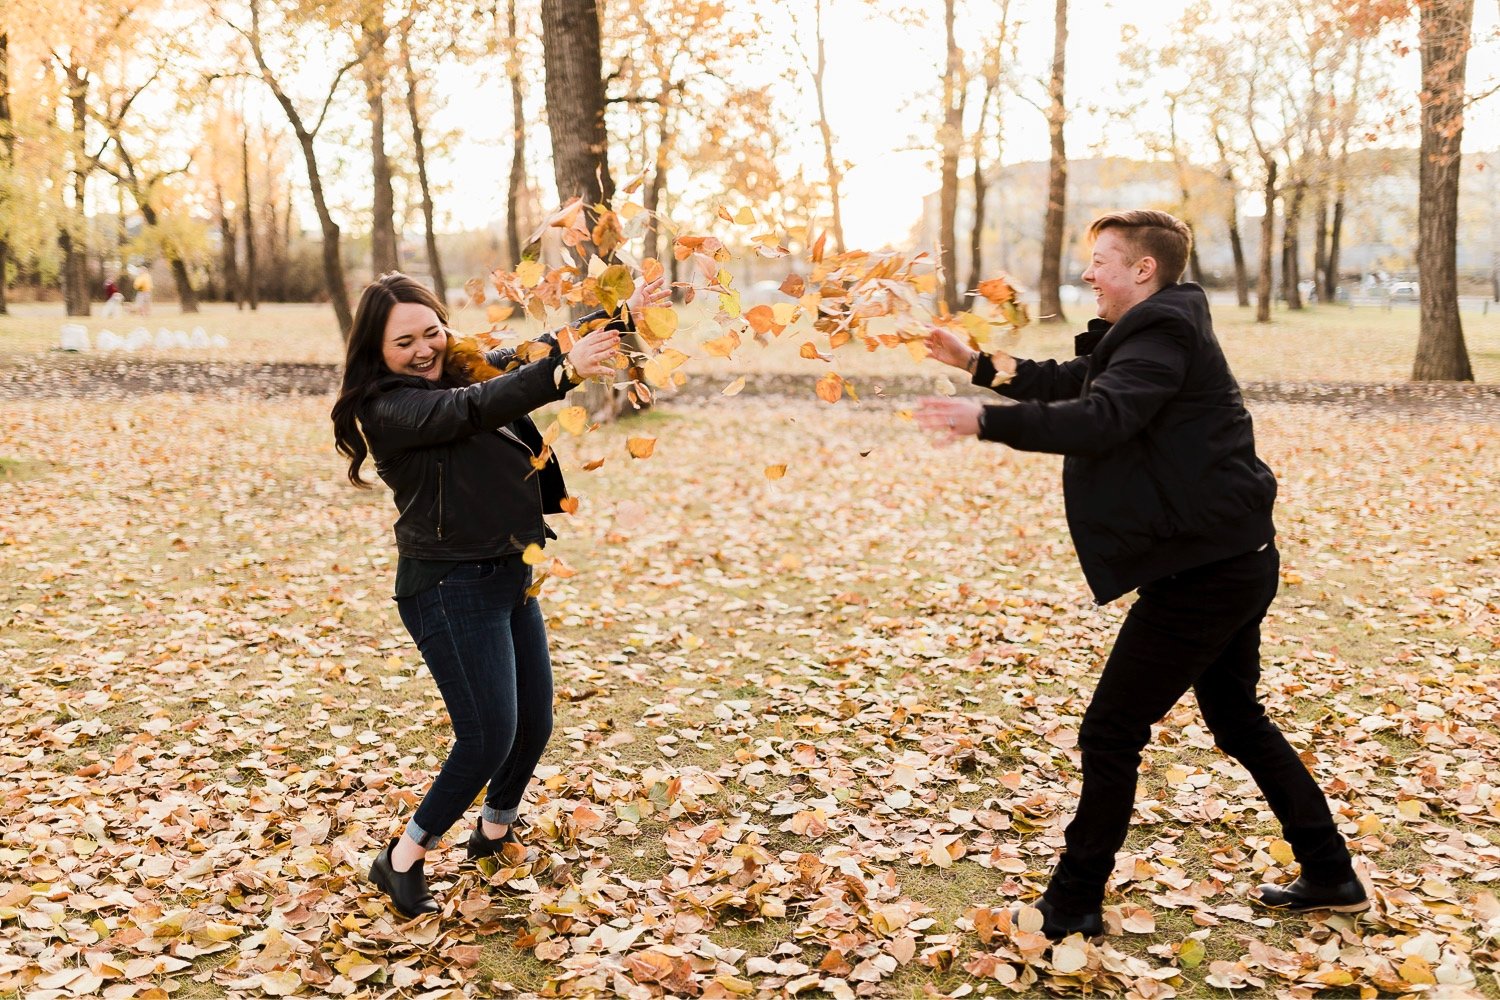 13_2018 29496_sunlight_landscape_trees_couple_engagement_close_simple_delicate_cuddle_kiss_golden_nature_intimate_fiancee_autumn_hour_soft_Calgary_bride_Alberta_photographer_forest_groom_outdoor.jpg